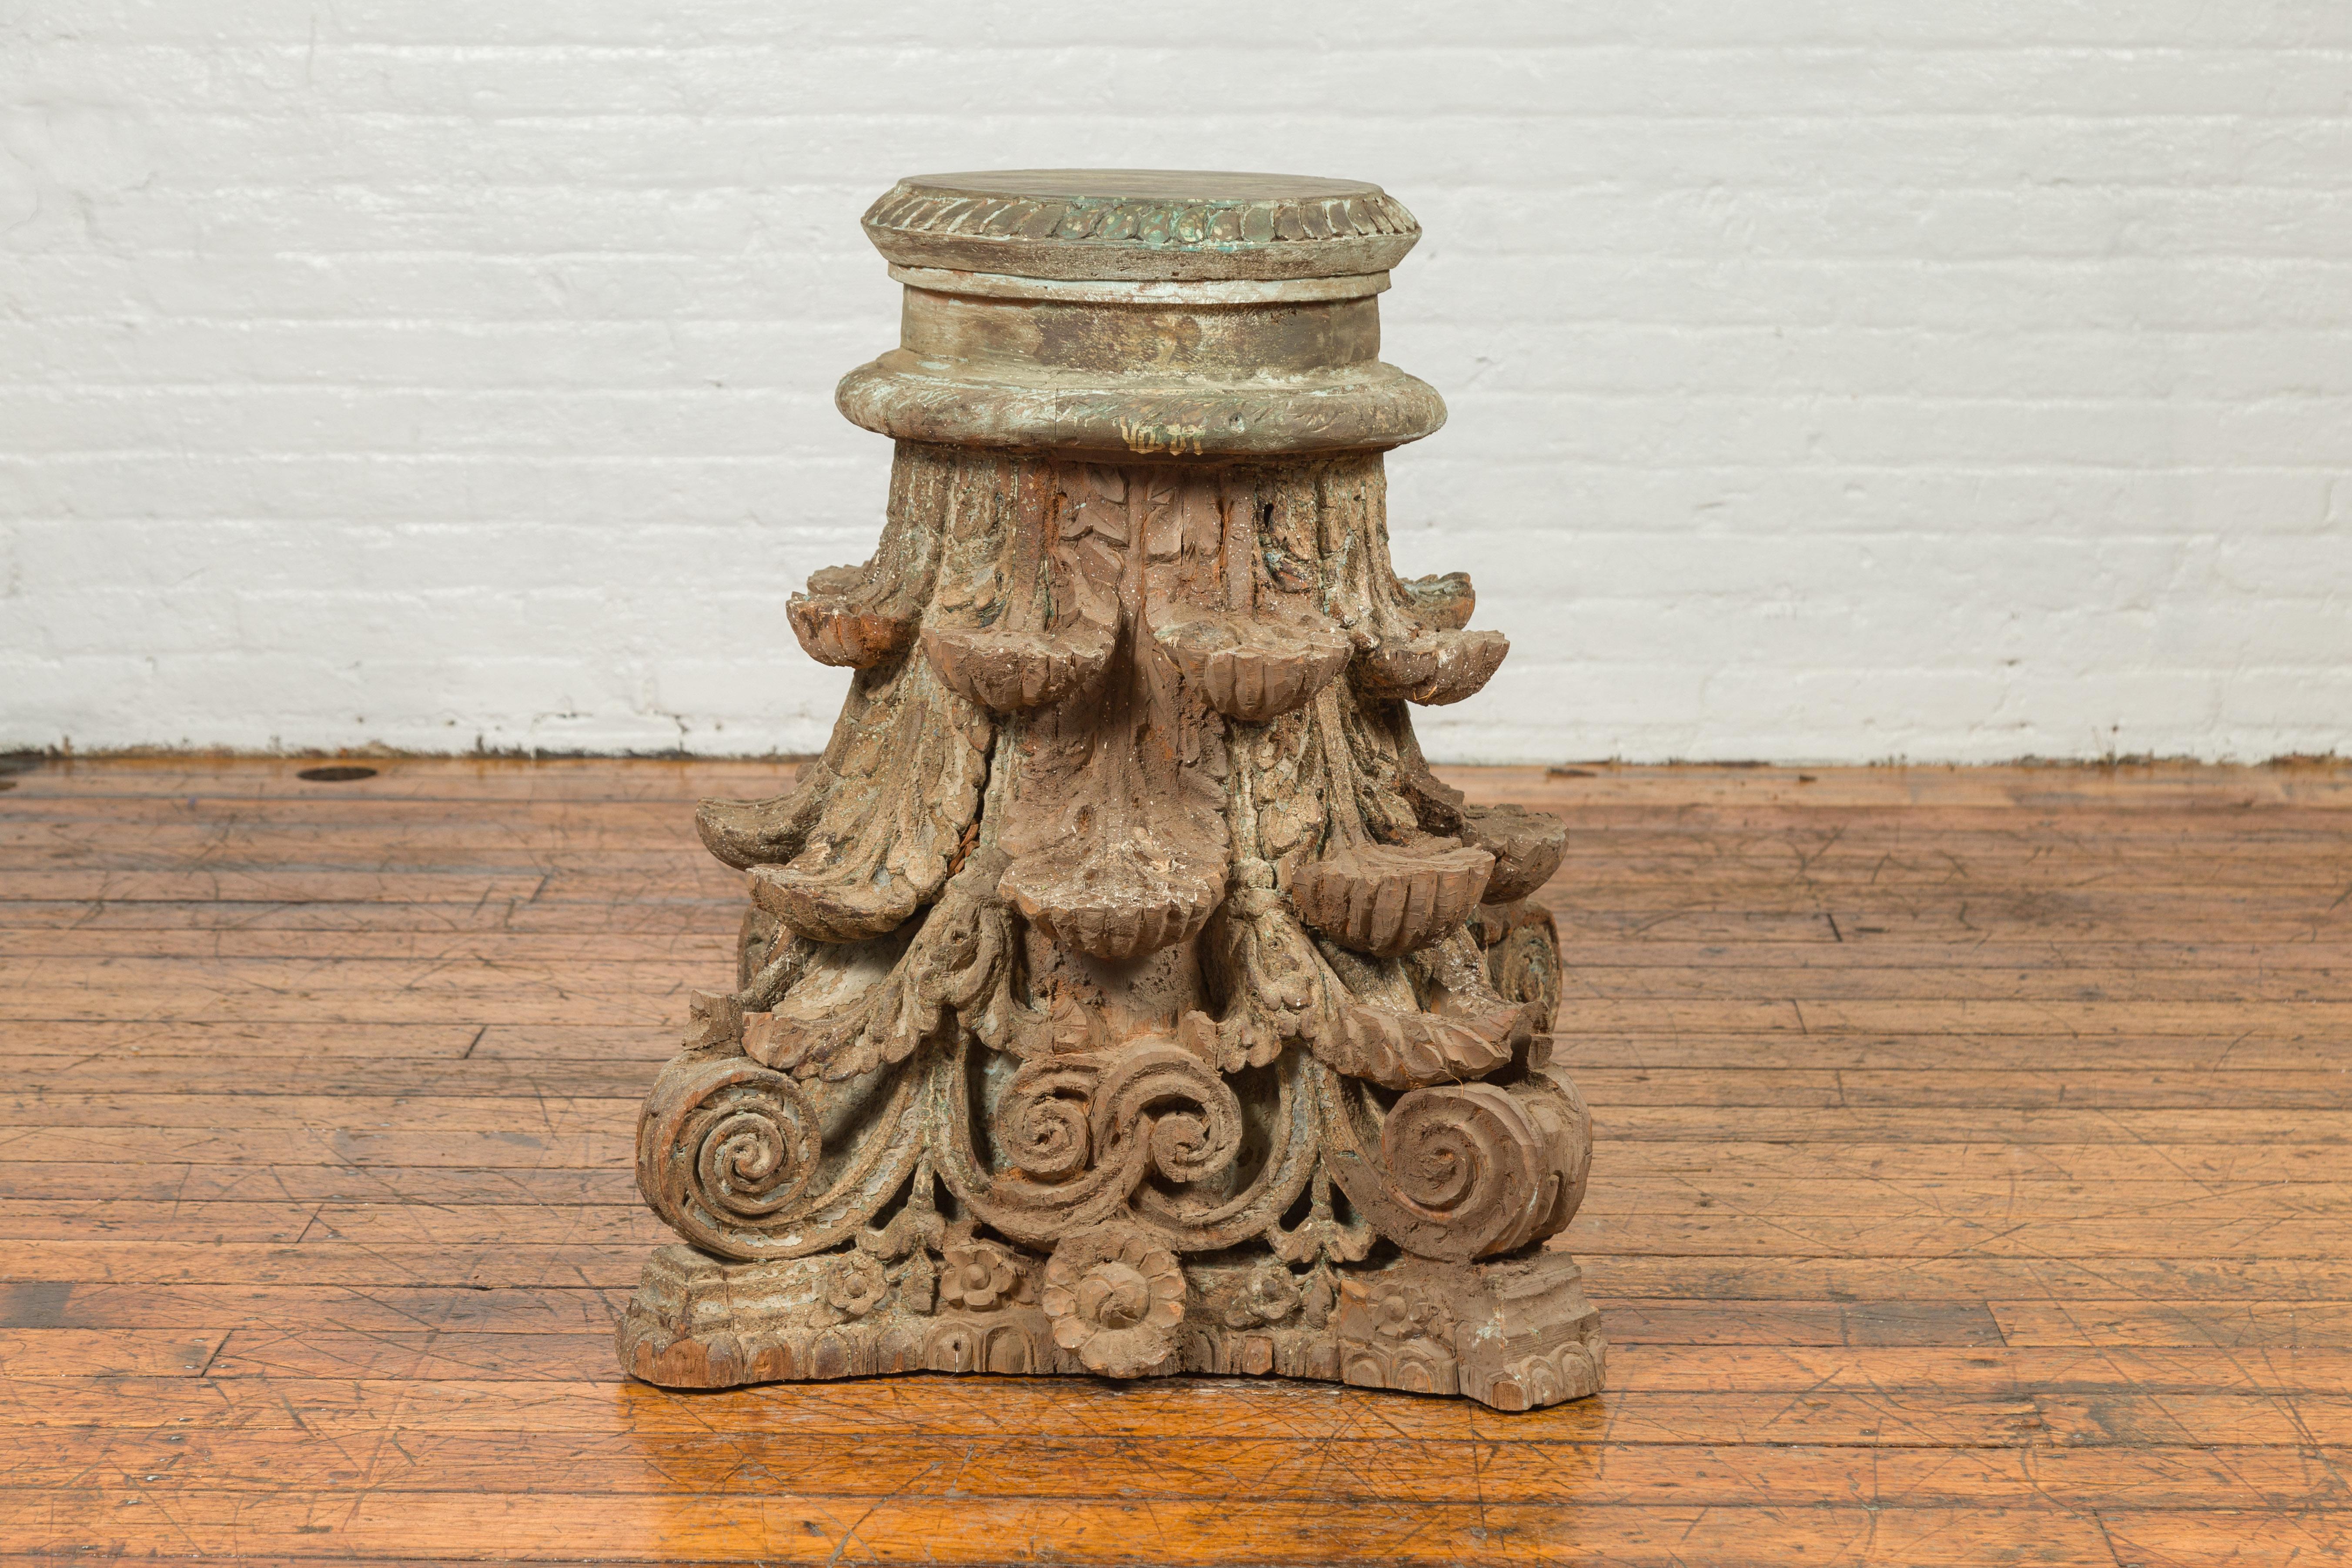 Antique Indian Corinthian Temple Capital Carving with Distressed Patina For Sale 1